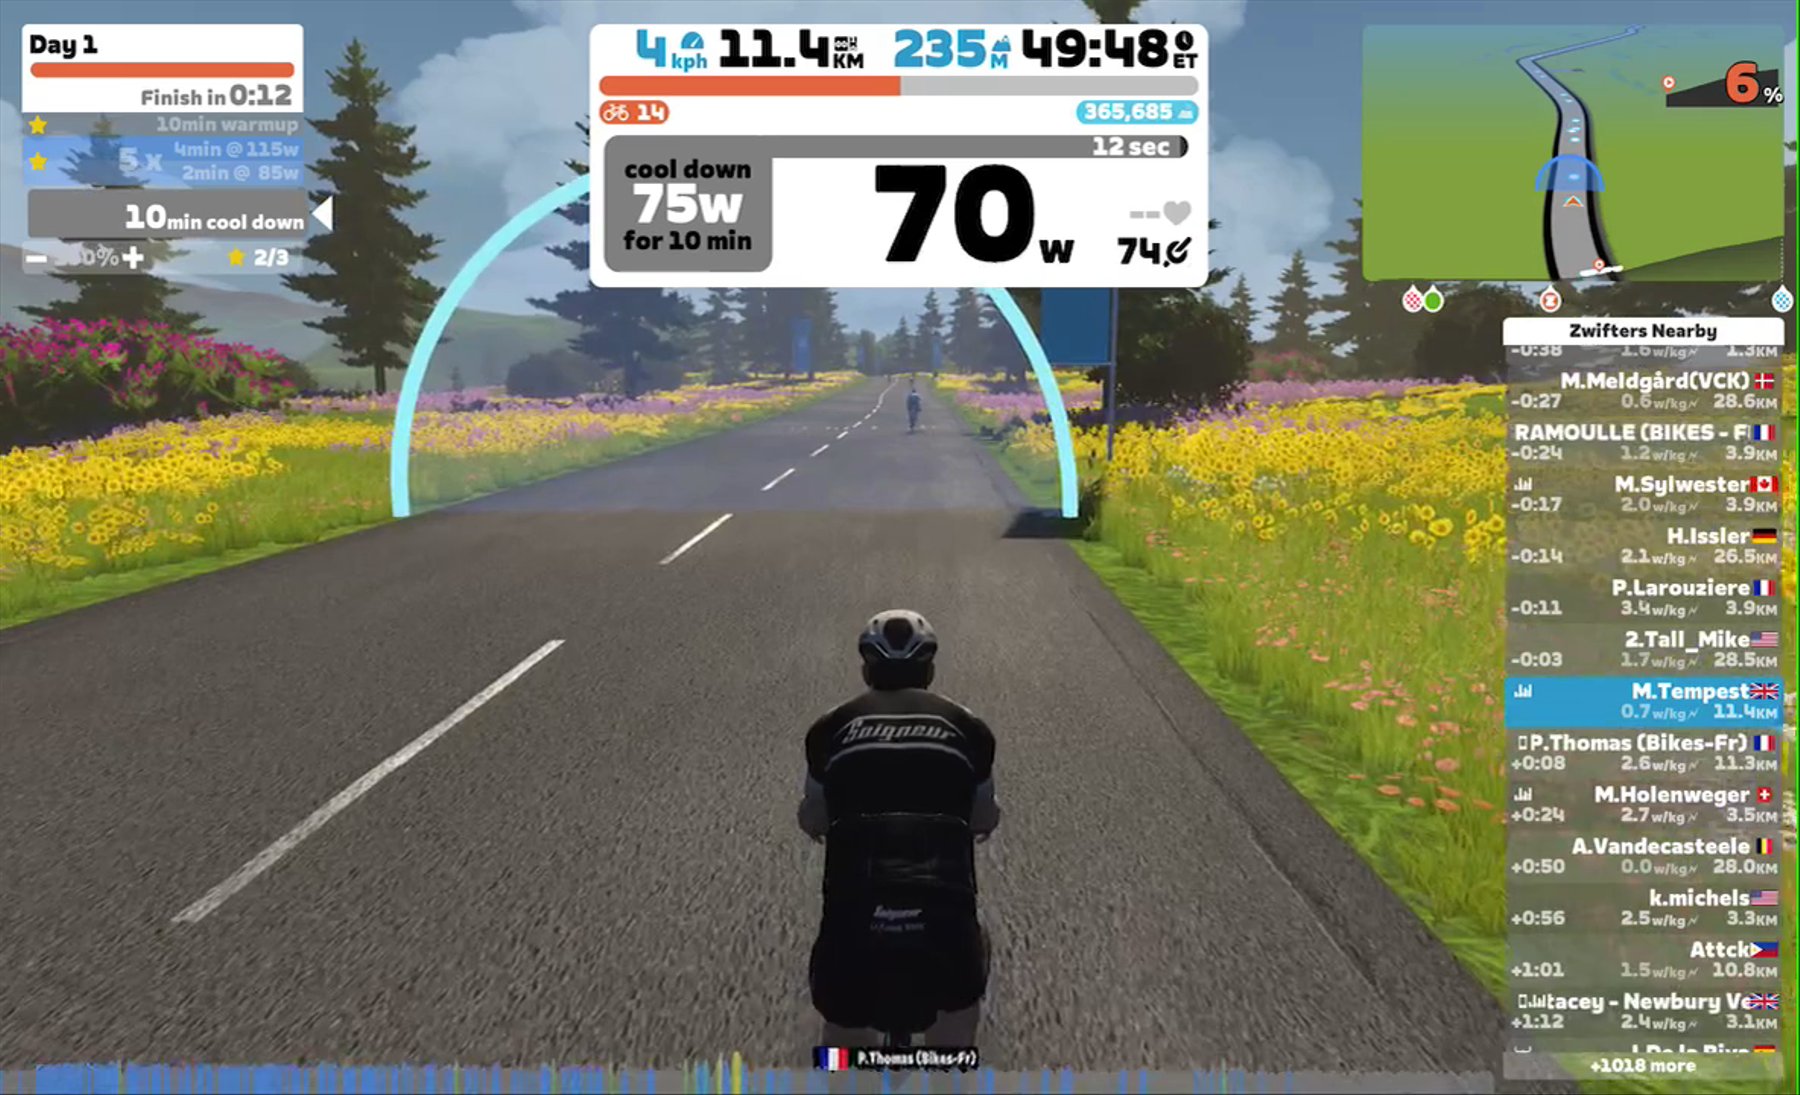 Zwift - Day 1 on Lutece Express in France